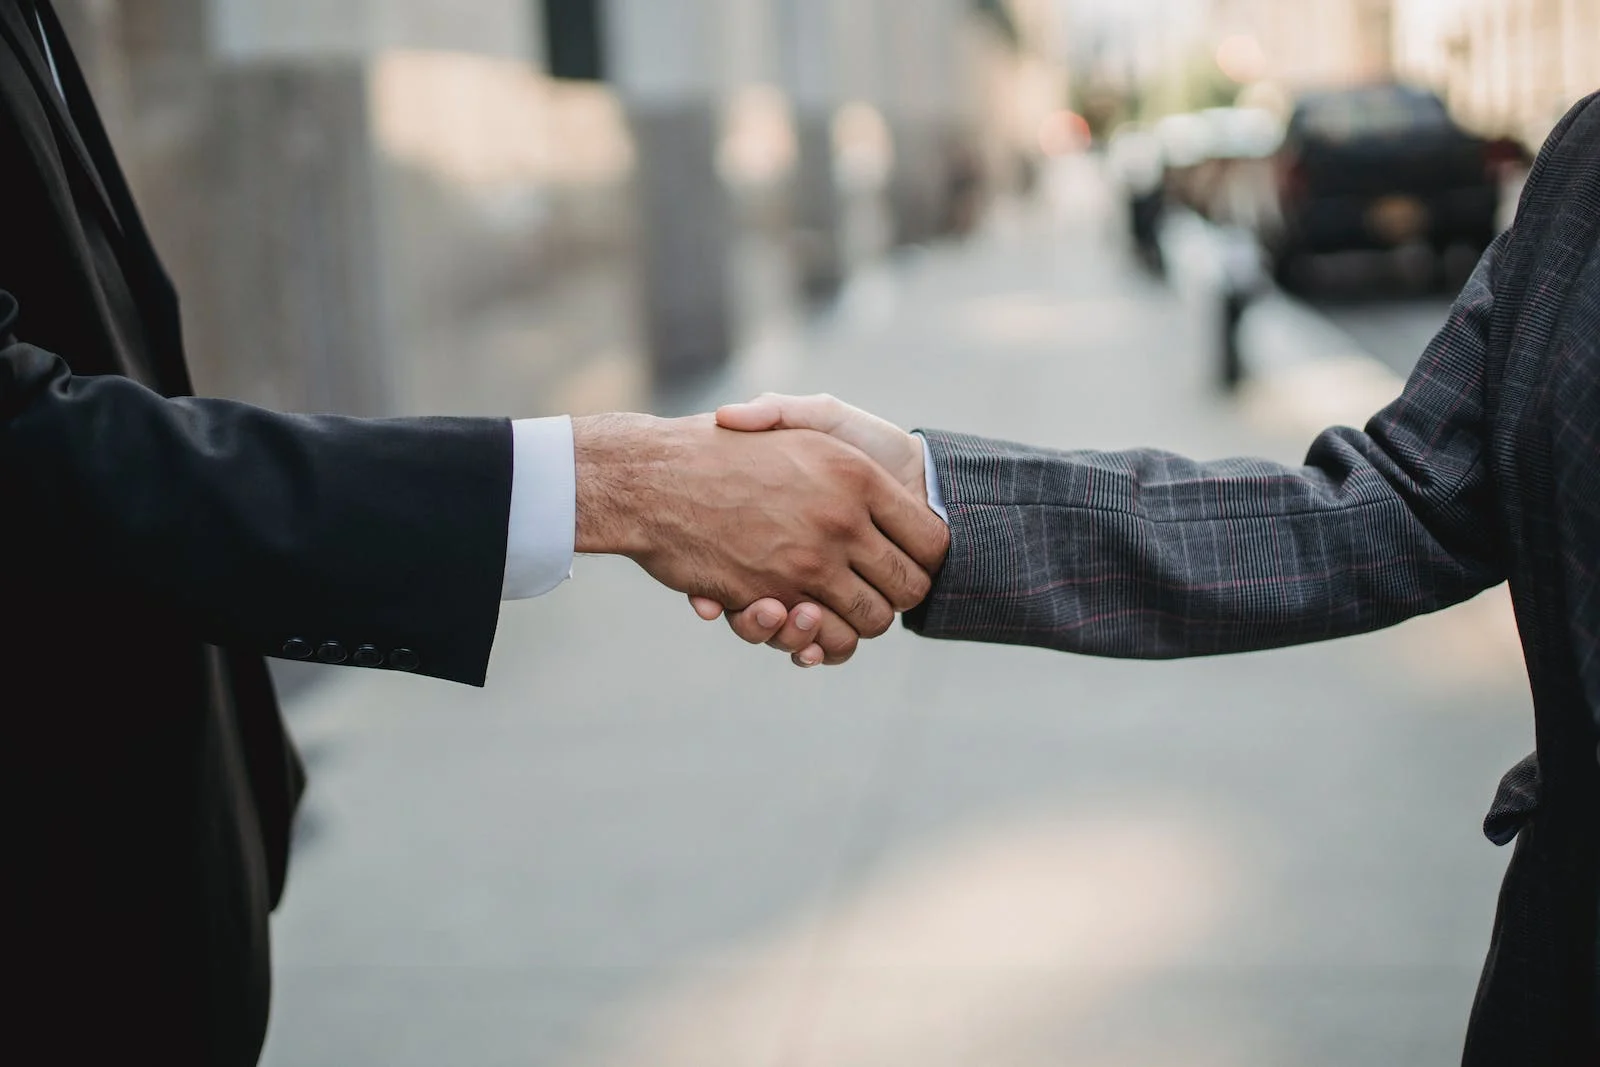 A Person In A Suit Shaking Hands With A Person In A Suit, Symbolizing The Establishment Of An Aml Program